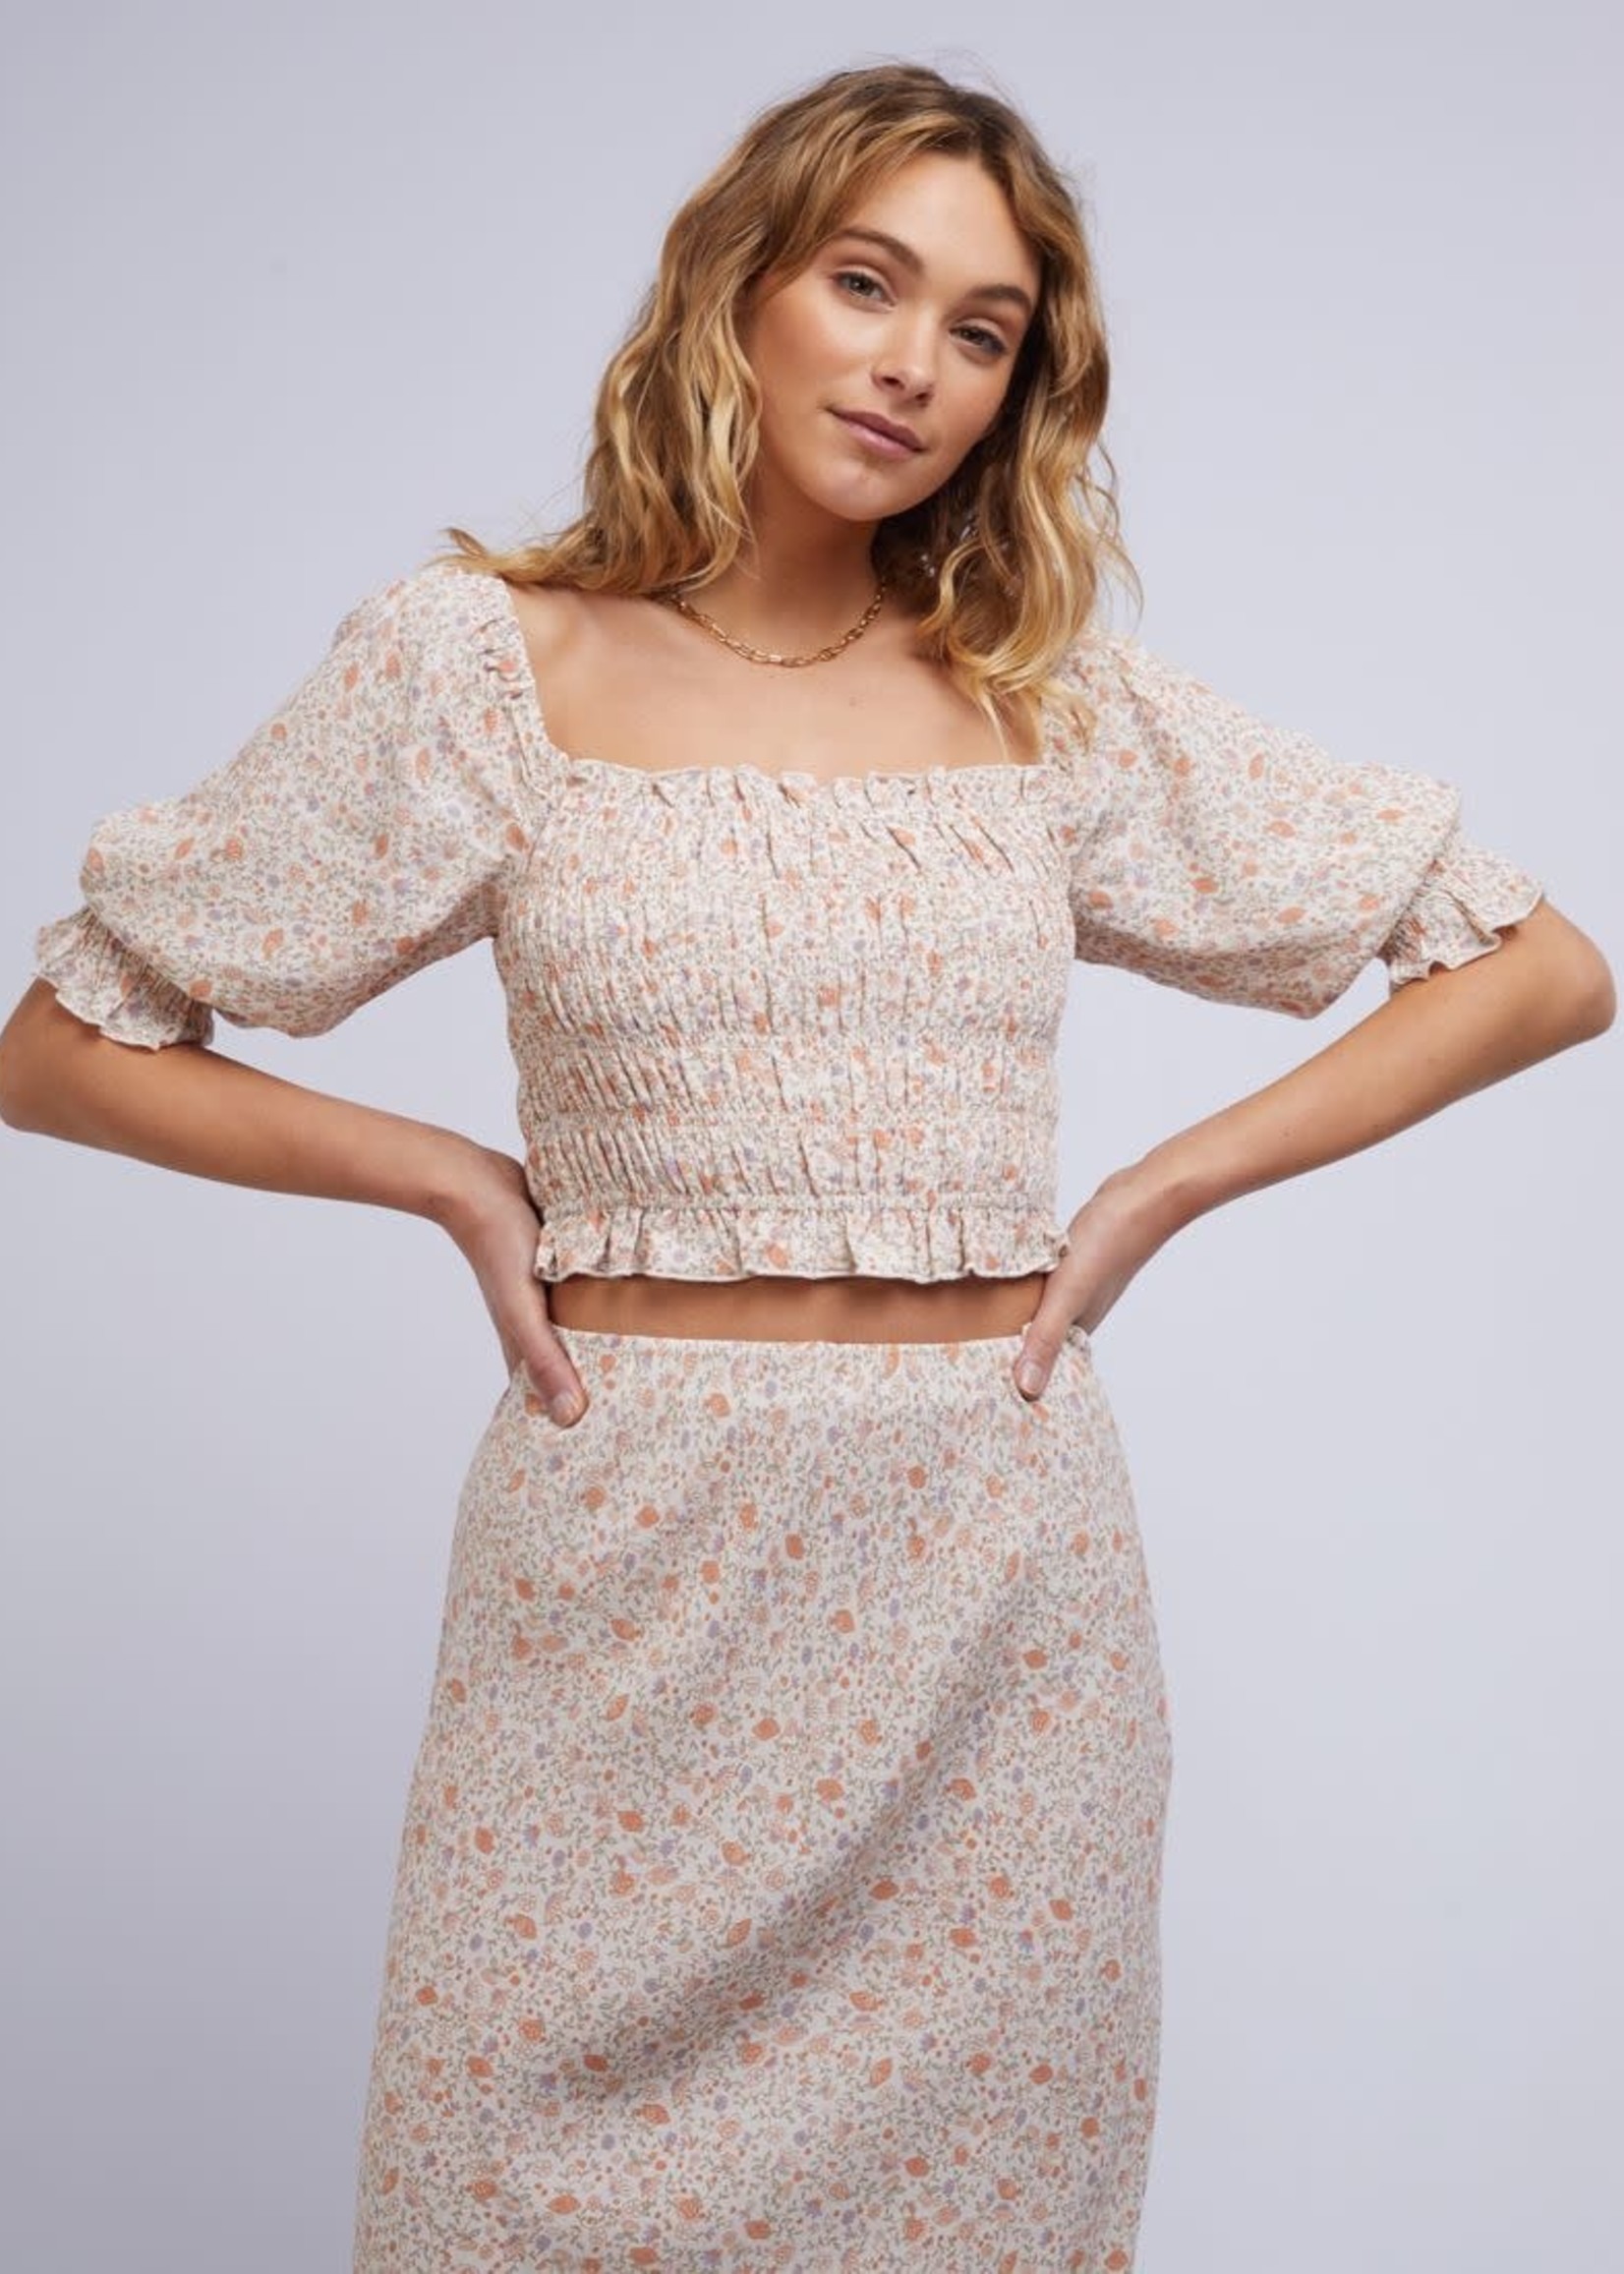 All About Eve Ivy Top (K)